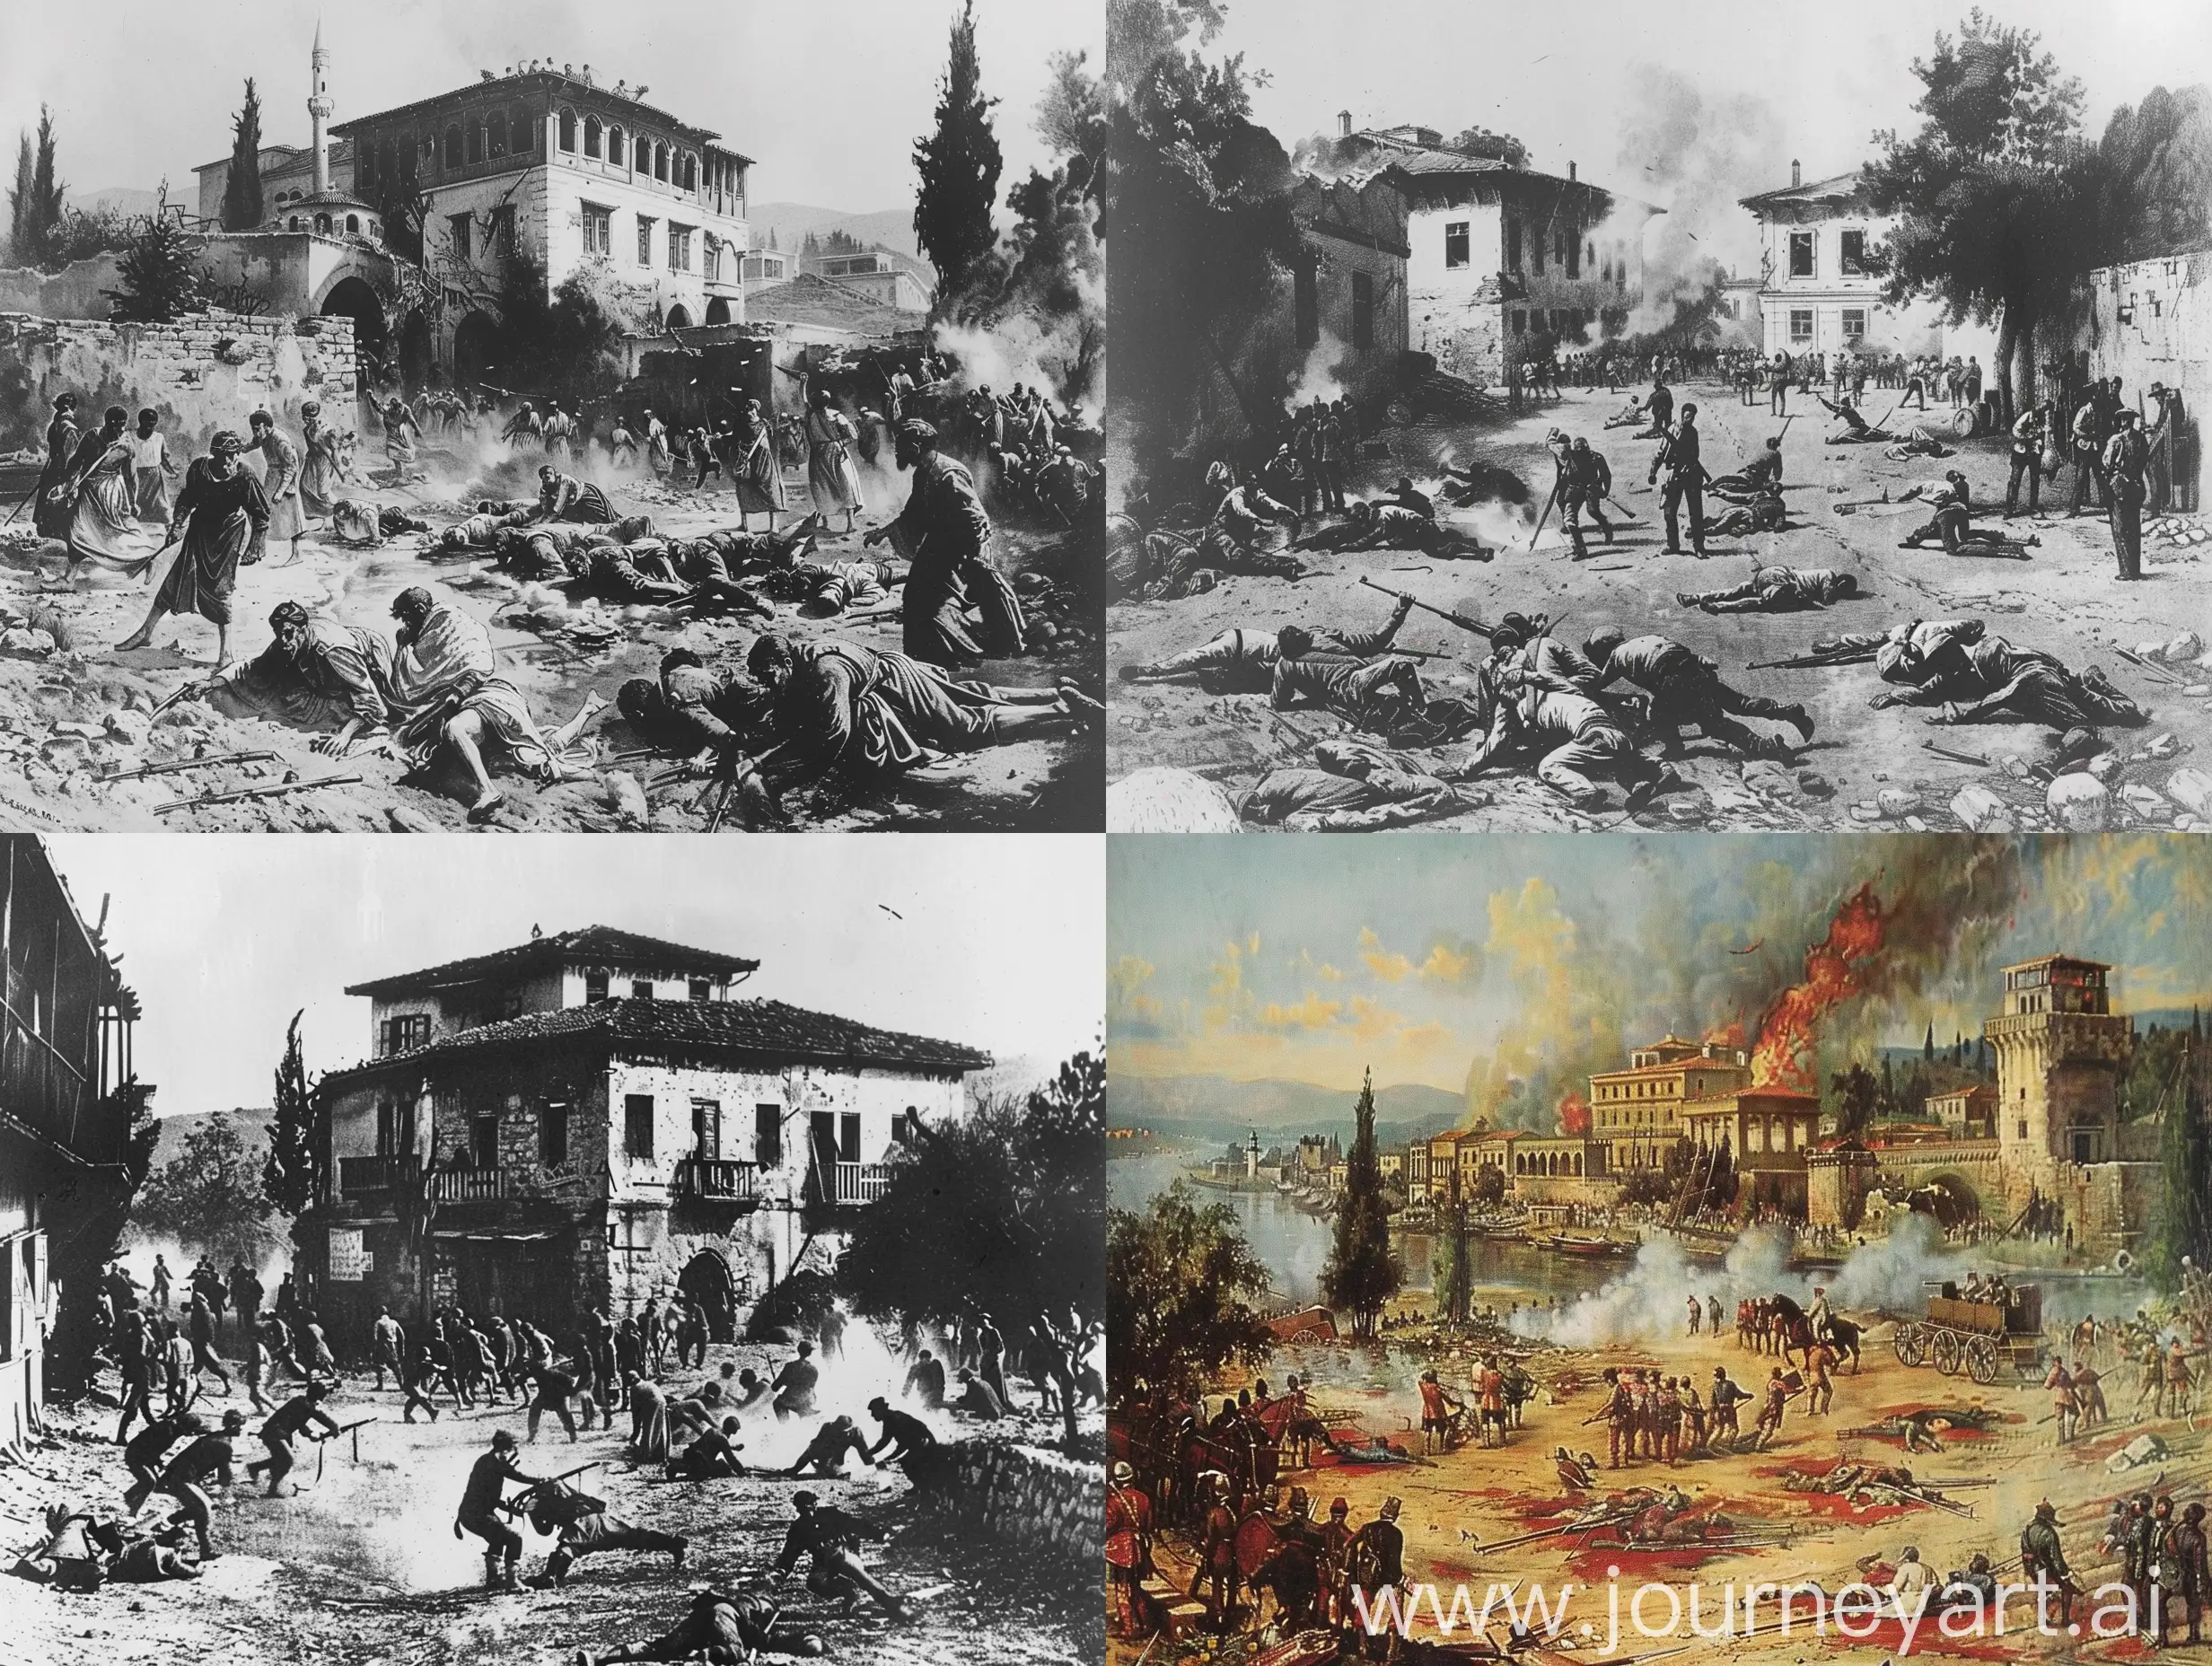 Massacre committed by the Greeks in Yalova during the War of Independence in Turkey. "Yalova Massacre"